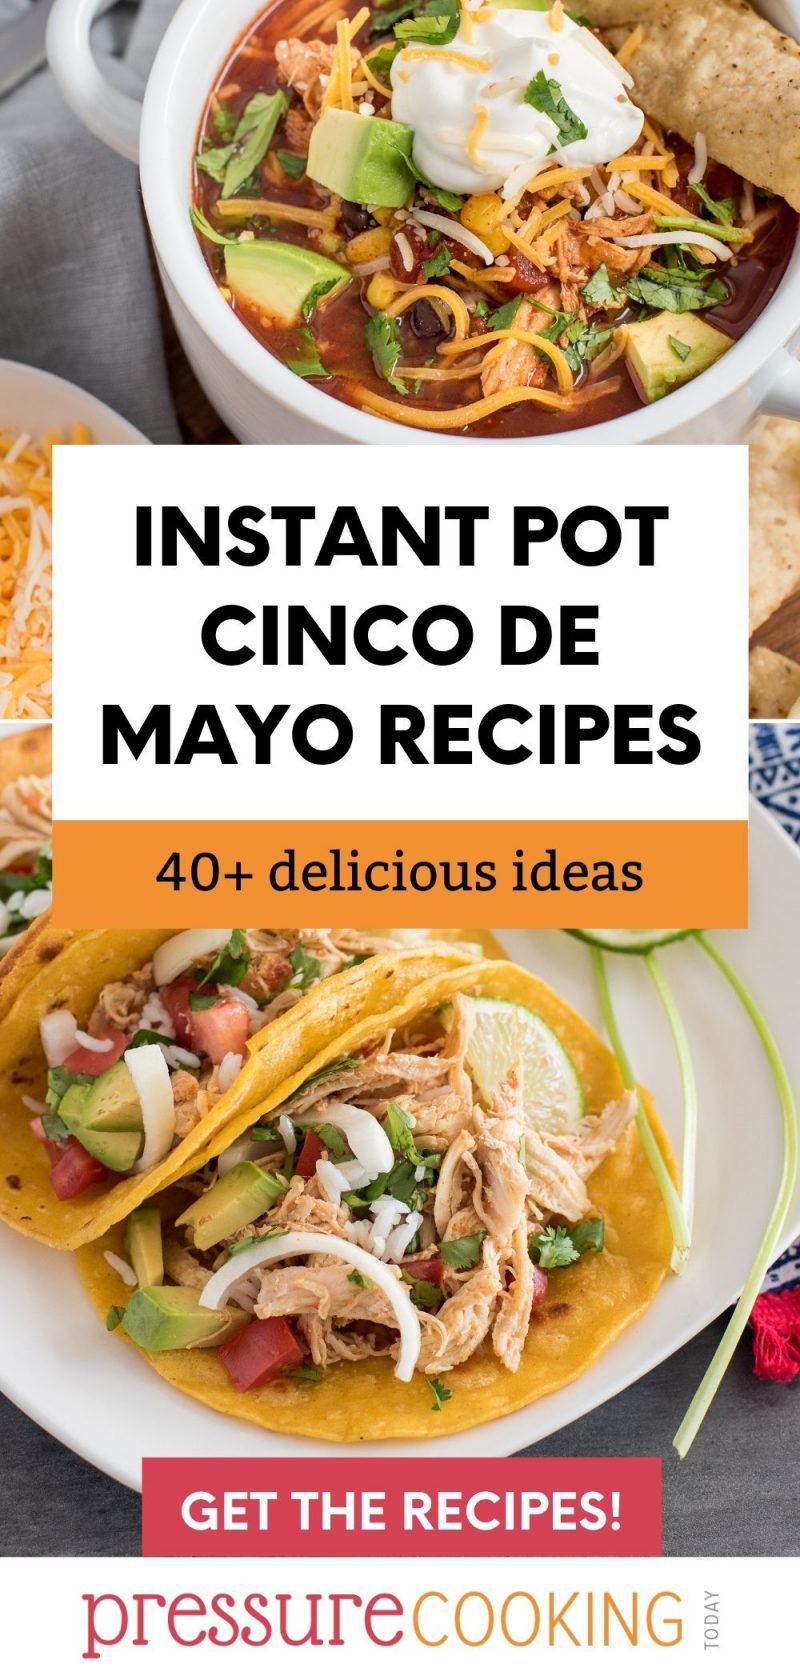 A pinterest image promoting Instant Pot Cinco De Mayo Recipes, overlaid on two pictures: chicken enchilada soup in a white bowl garnished with sour cream on top and easy chicken tacos on a white plate on the bottom